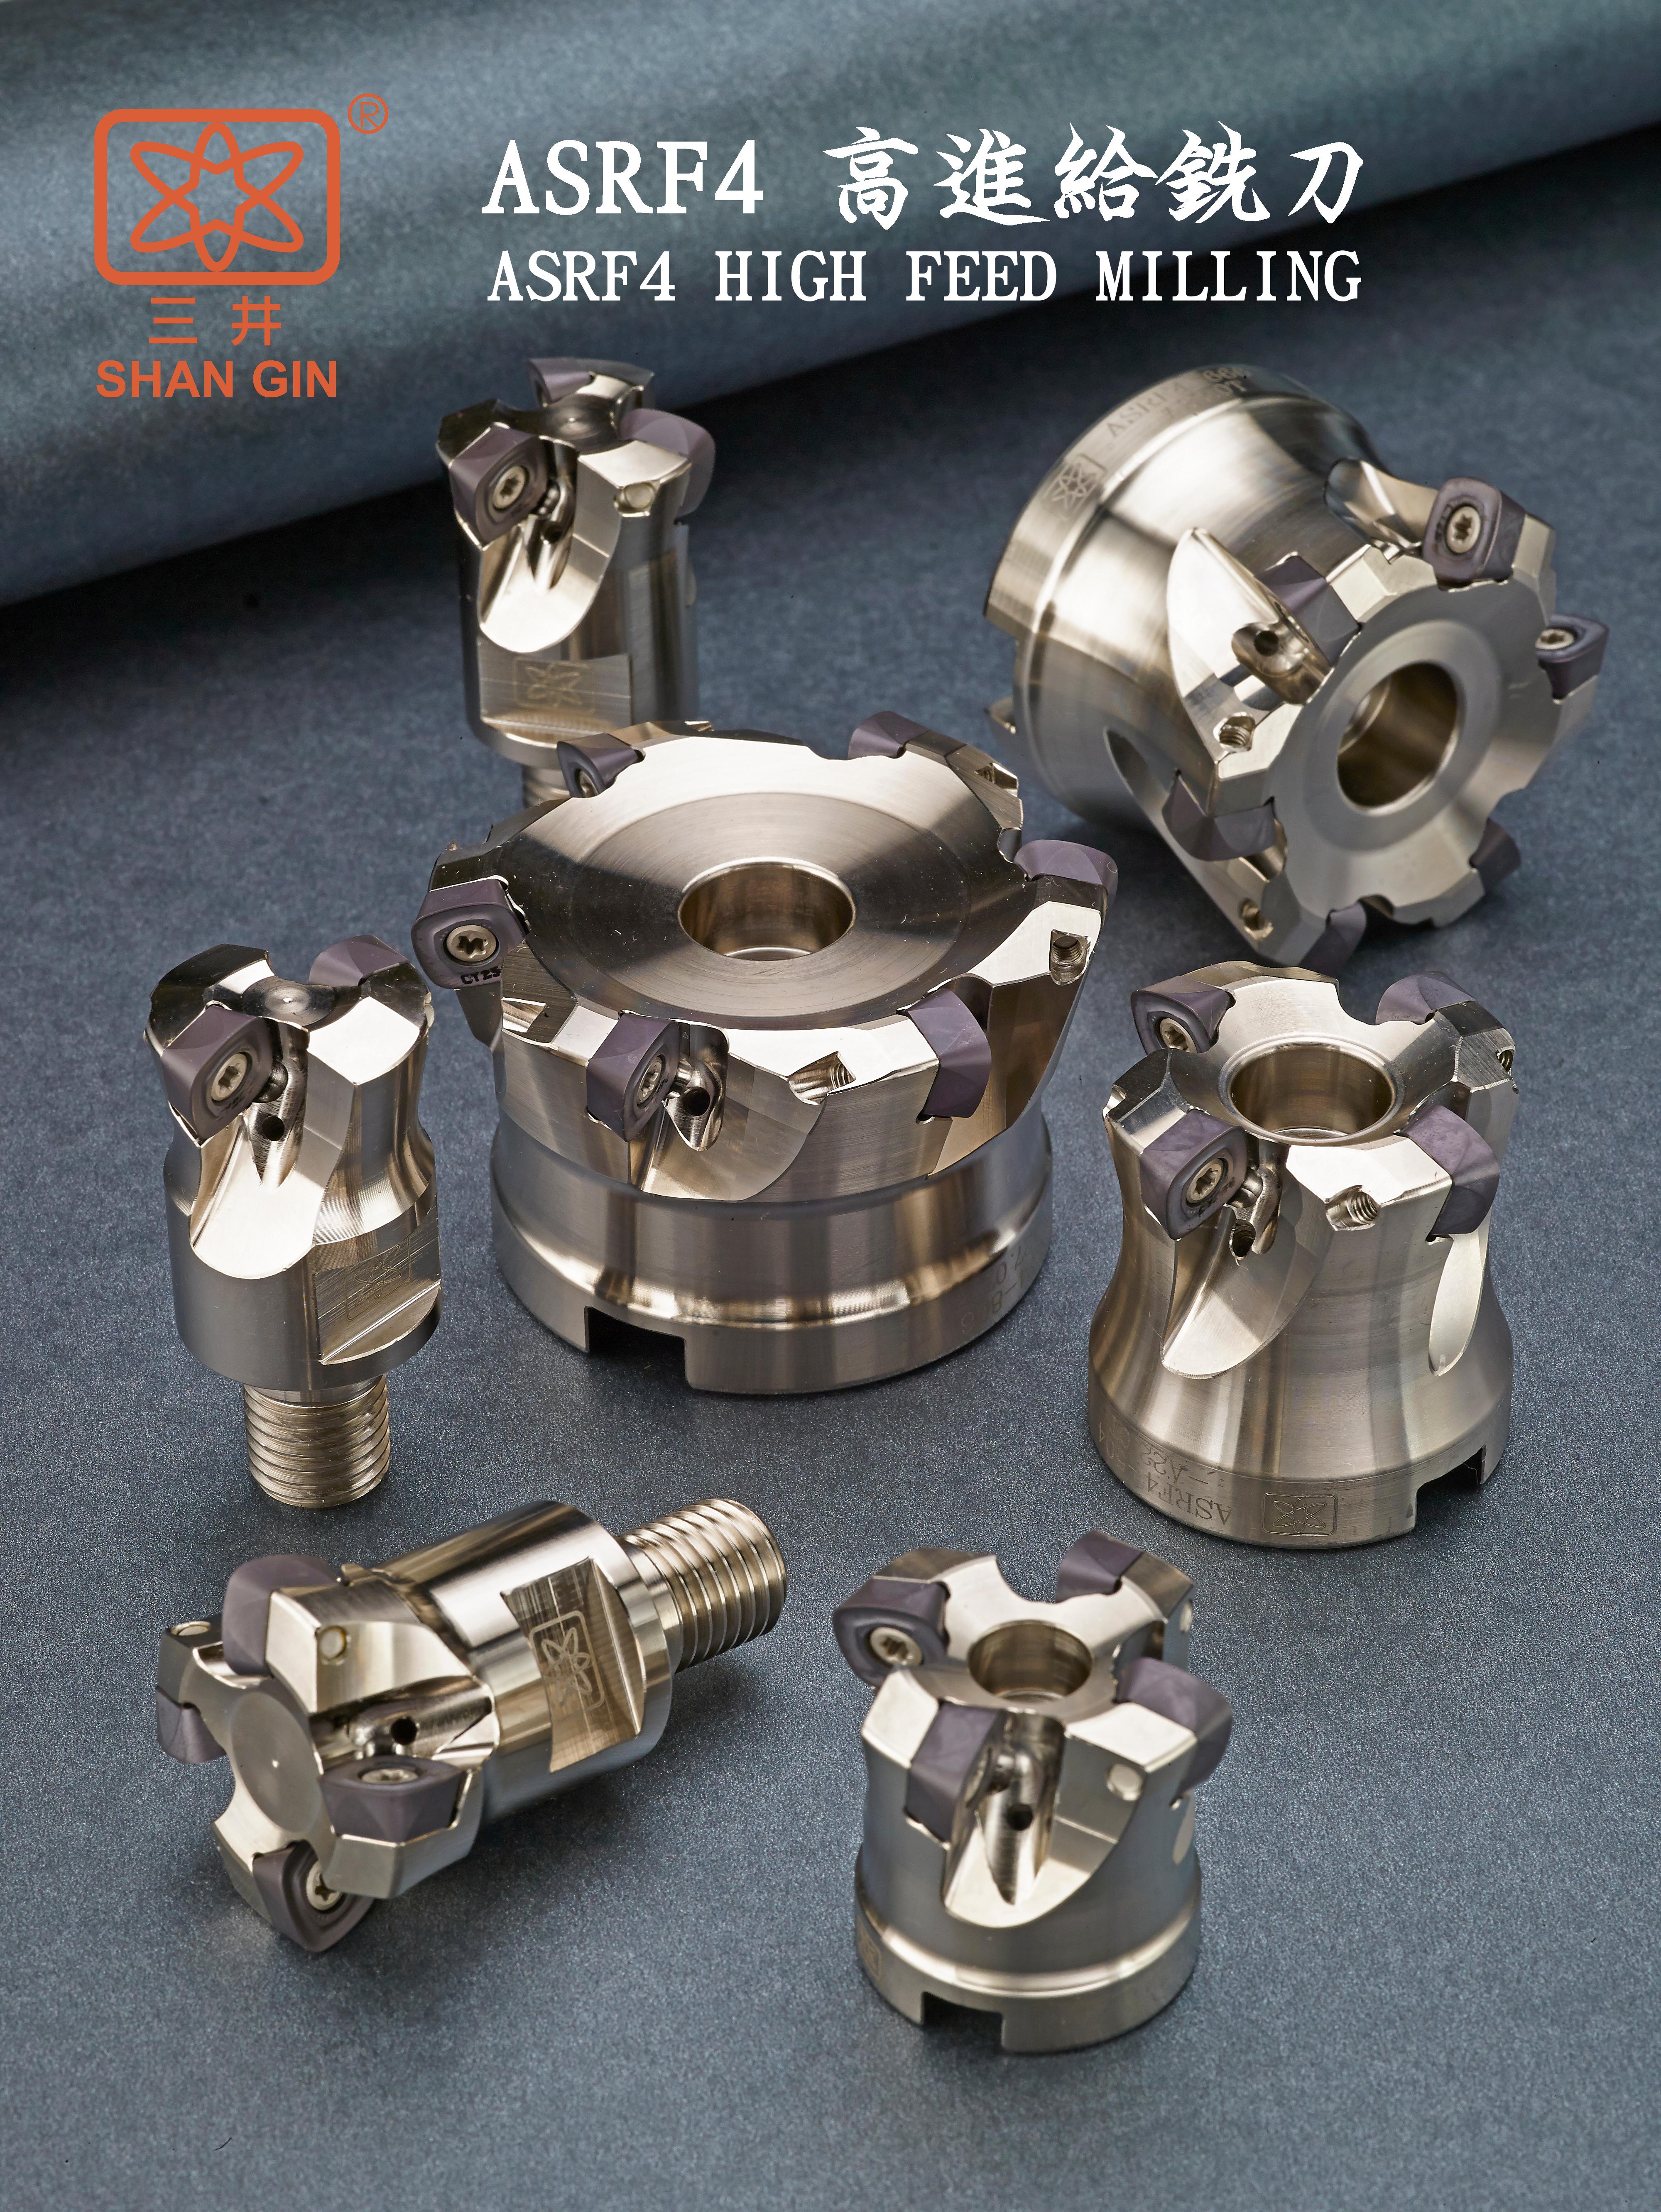 Products|ASRF4 HIGH FEED MILLING